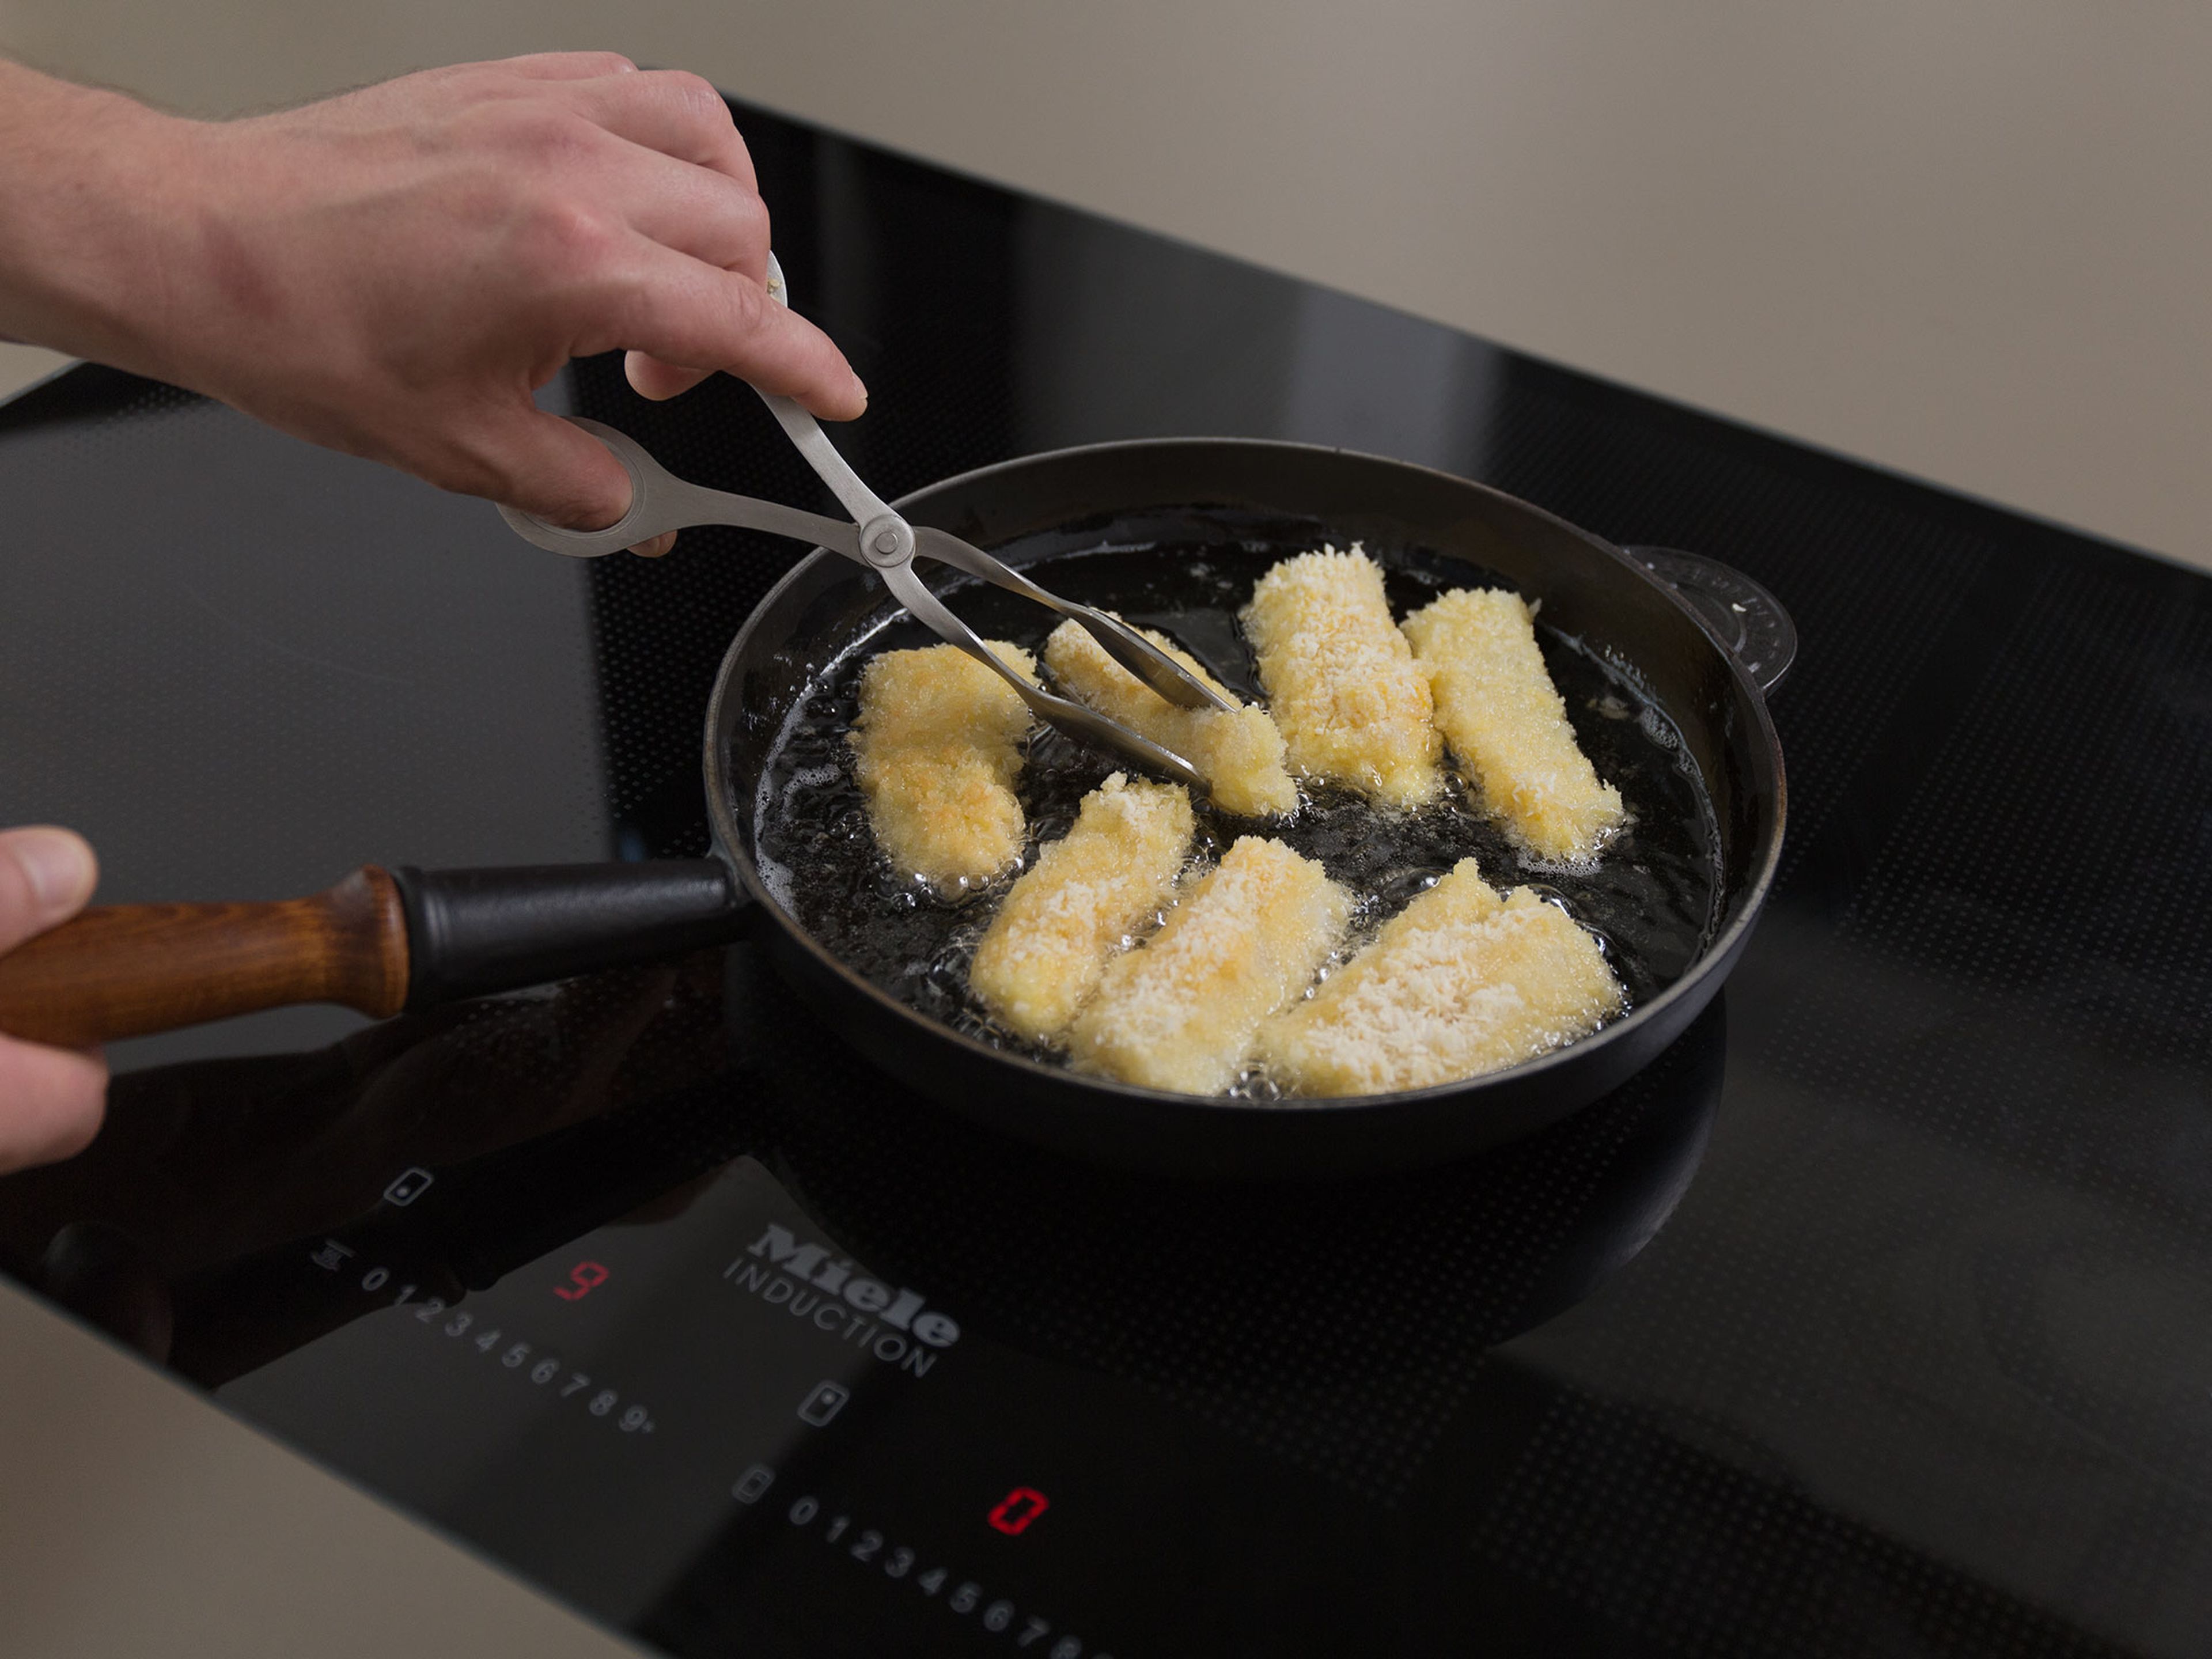 Add oil to a pan set over medium-high heat. Add cod to pan and fry on both sides for approx. 6 – 8 min., or until golden brown. Serve with mashed potatoes and peas and mayonnaise. Enjoy!